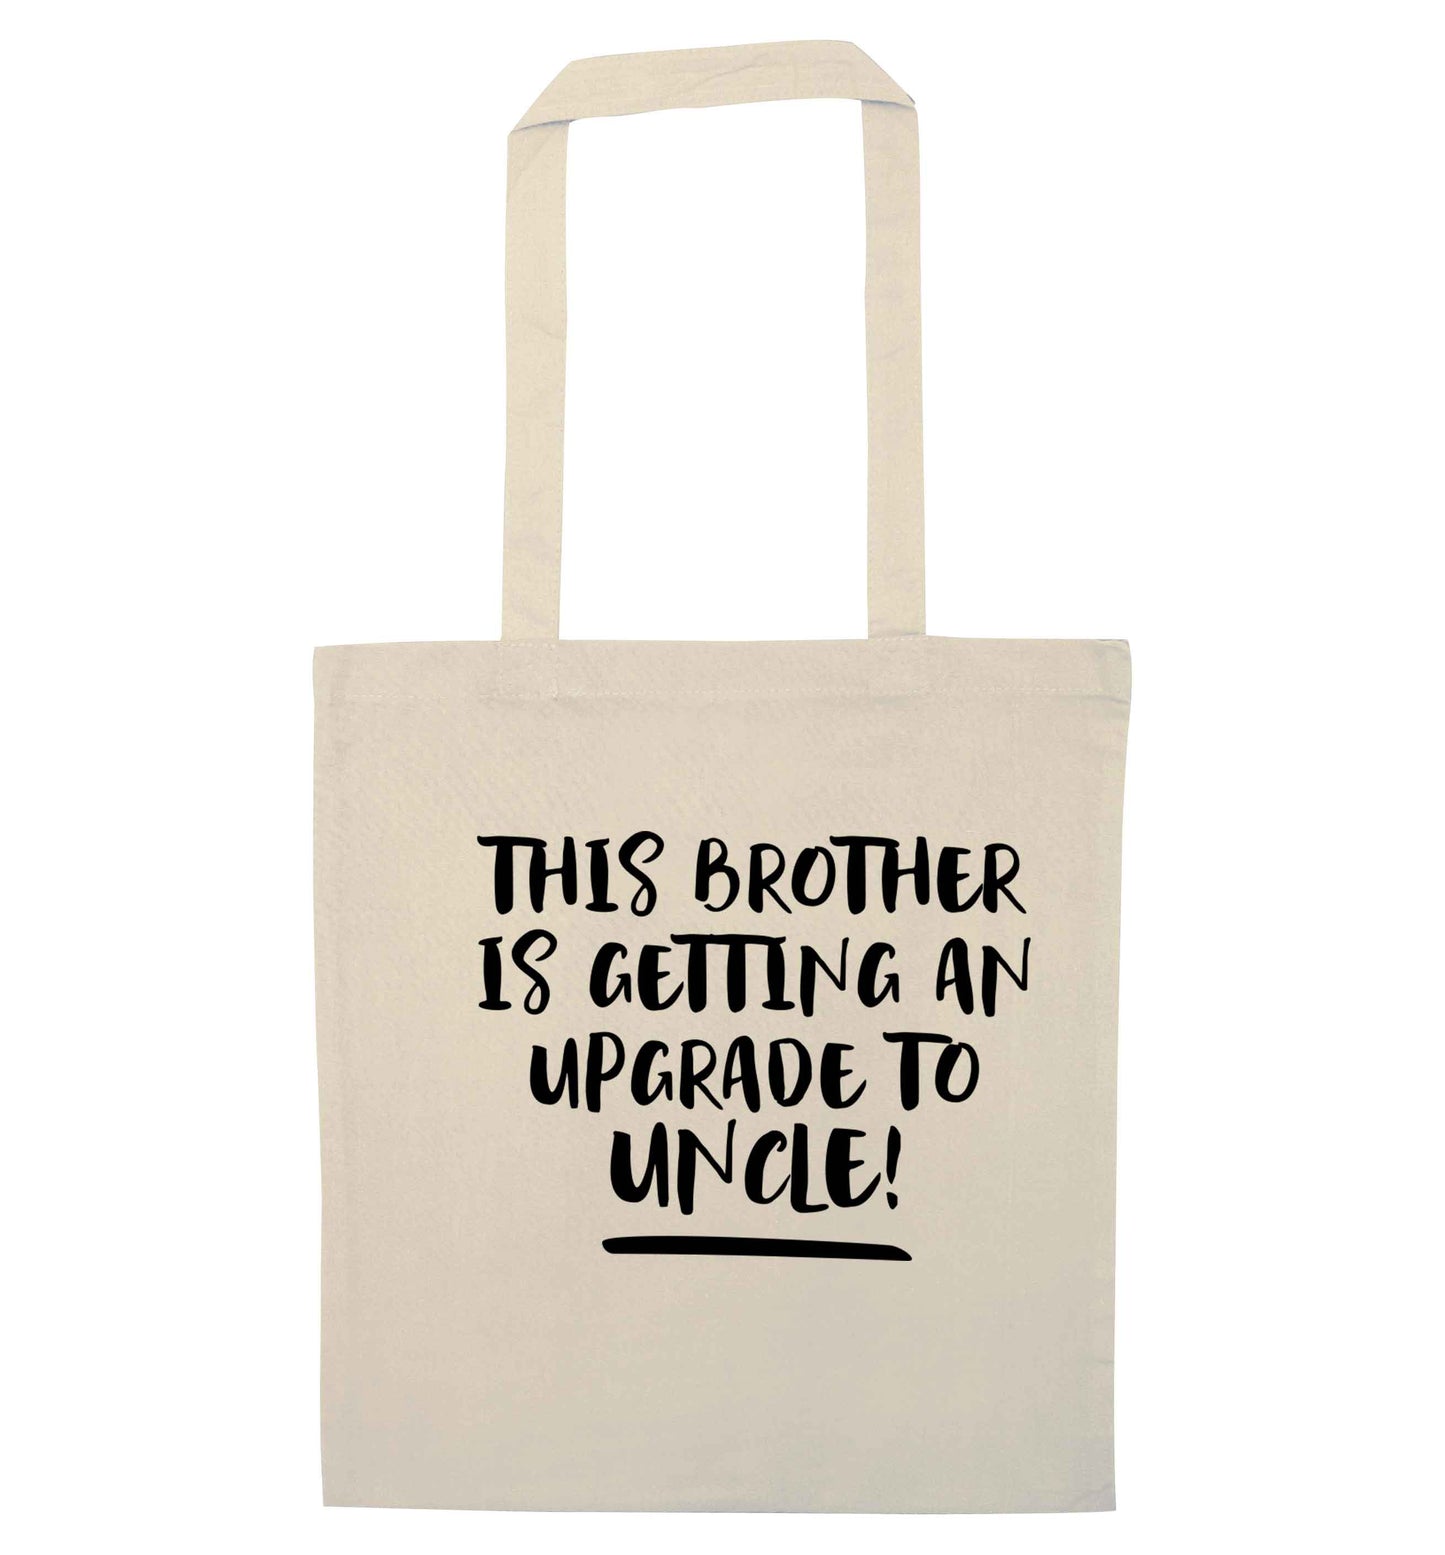 This brother is getting an upgrade to uncle! natural tote bag